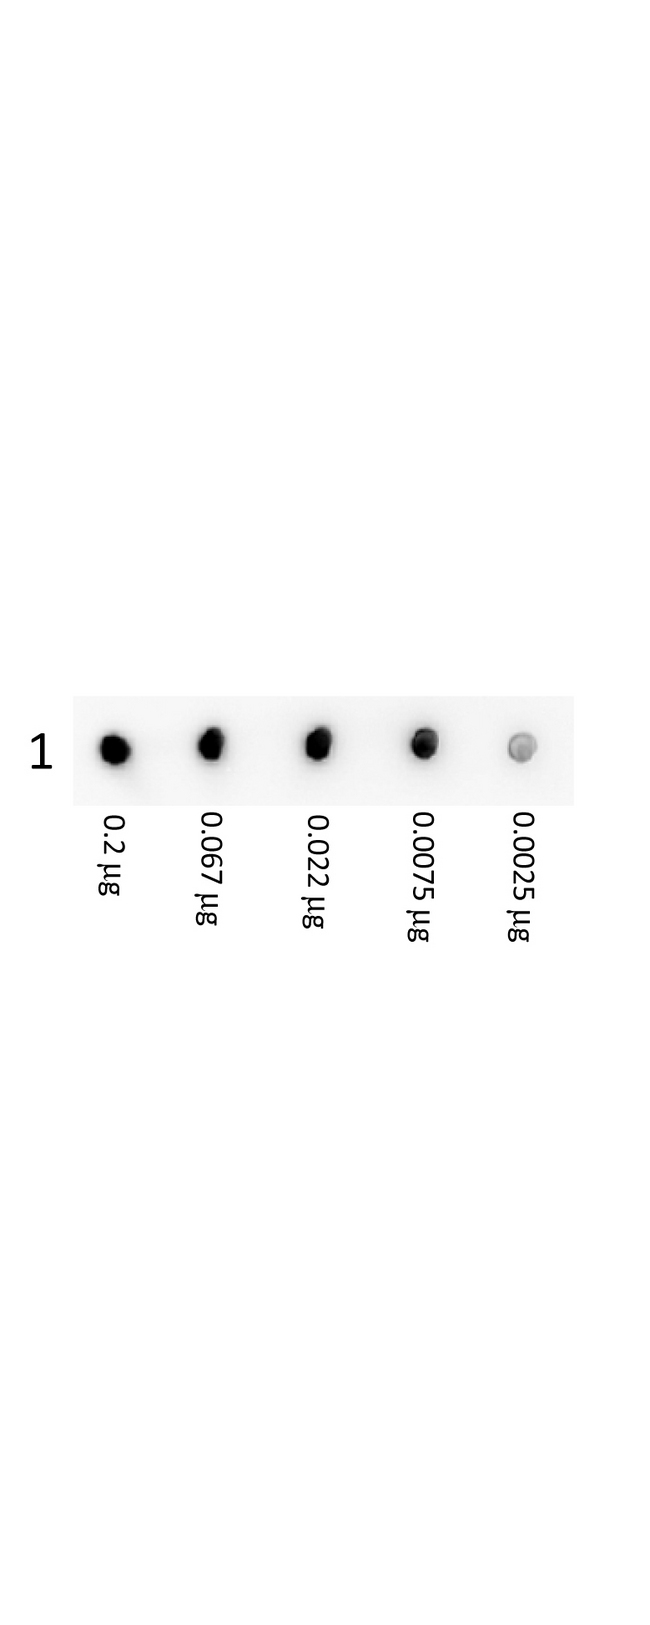 Streptavidin Antibody - Rabbit Anti-Streptavidin Antibody - Dot Blot. Dot Blot showing the detection of Streptavidin. A three-fold serial dilution of DyLight 488 Conjugated Streptavidin starting at 200 ng was spotted onto 0.45 um nitrocellulose and blocked in 1% BSA-TTBS (MB-013, diluted to 1X) 30 min at 20°C. Anti-Streptavidin (RABBIT) Antibody (p/n LS-X35533) was incubated in Blocking Buffer for Fluorescent Western Blot (p/n MB-070) at 1:1000 for 1 Hour at 20°C. An HRP Gt-a-Rb secondary antibody was incubated at 1:40000 for 30 min at 20°C and imaged using the Bio-Rad VersaDoc 4000 MP.